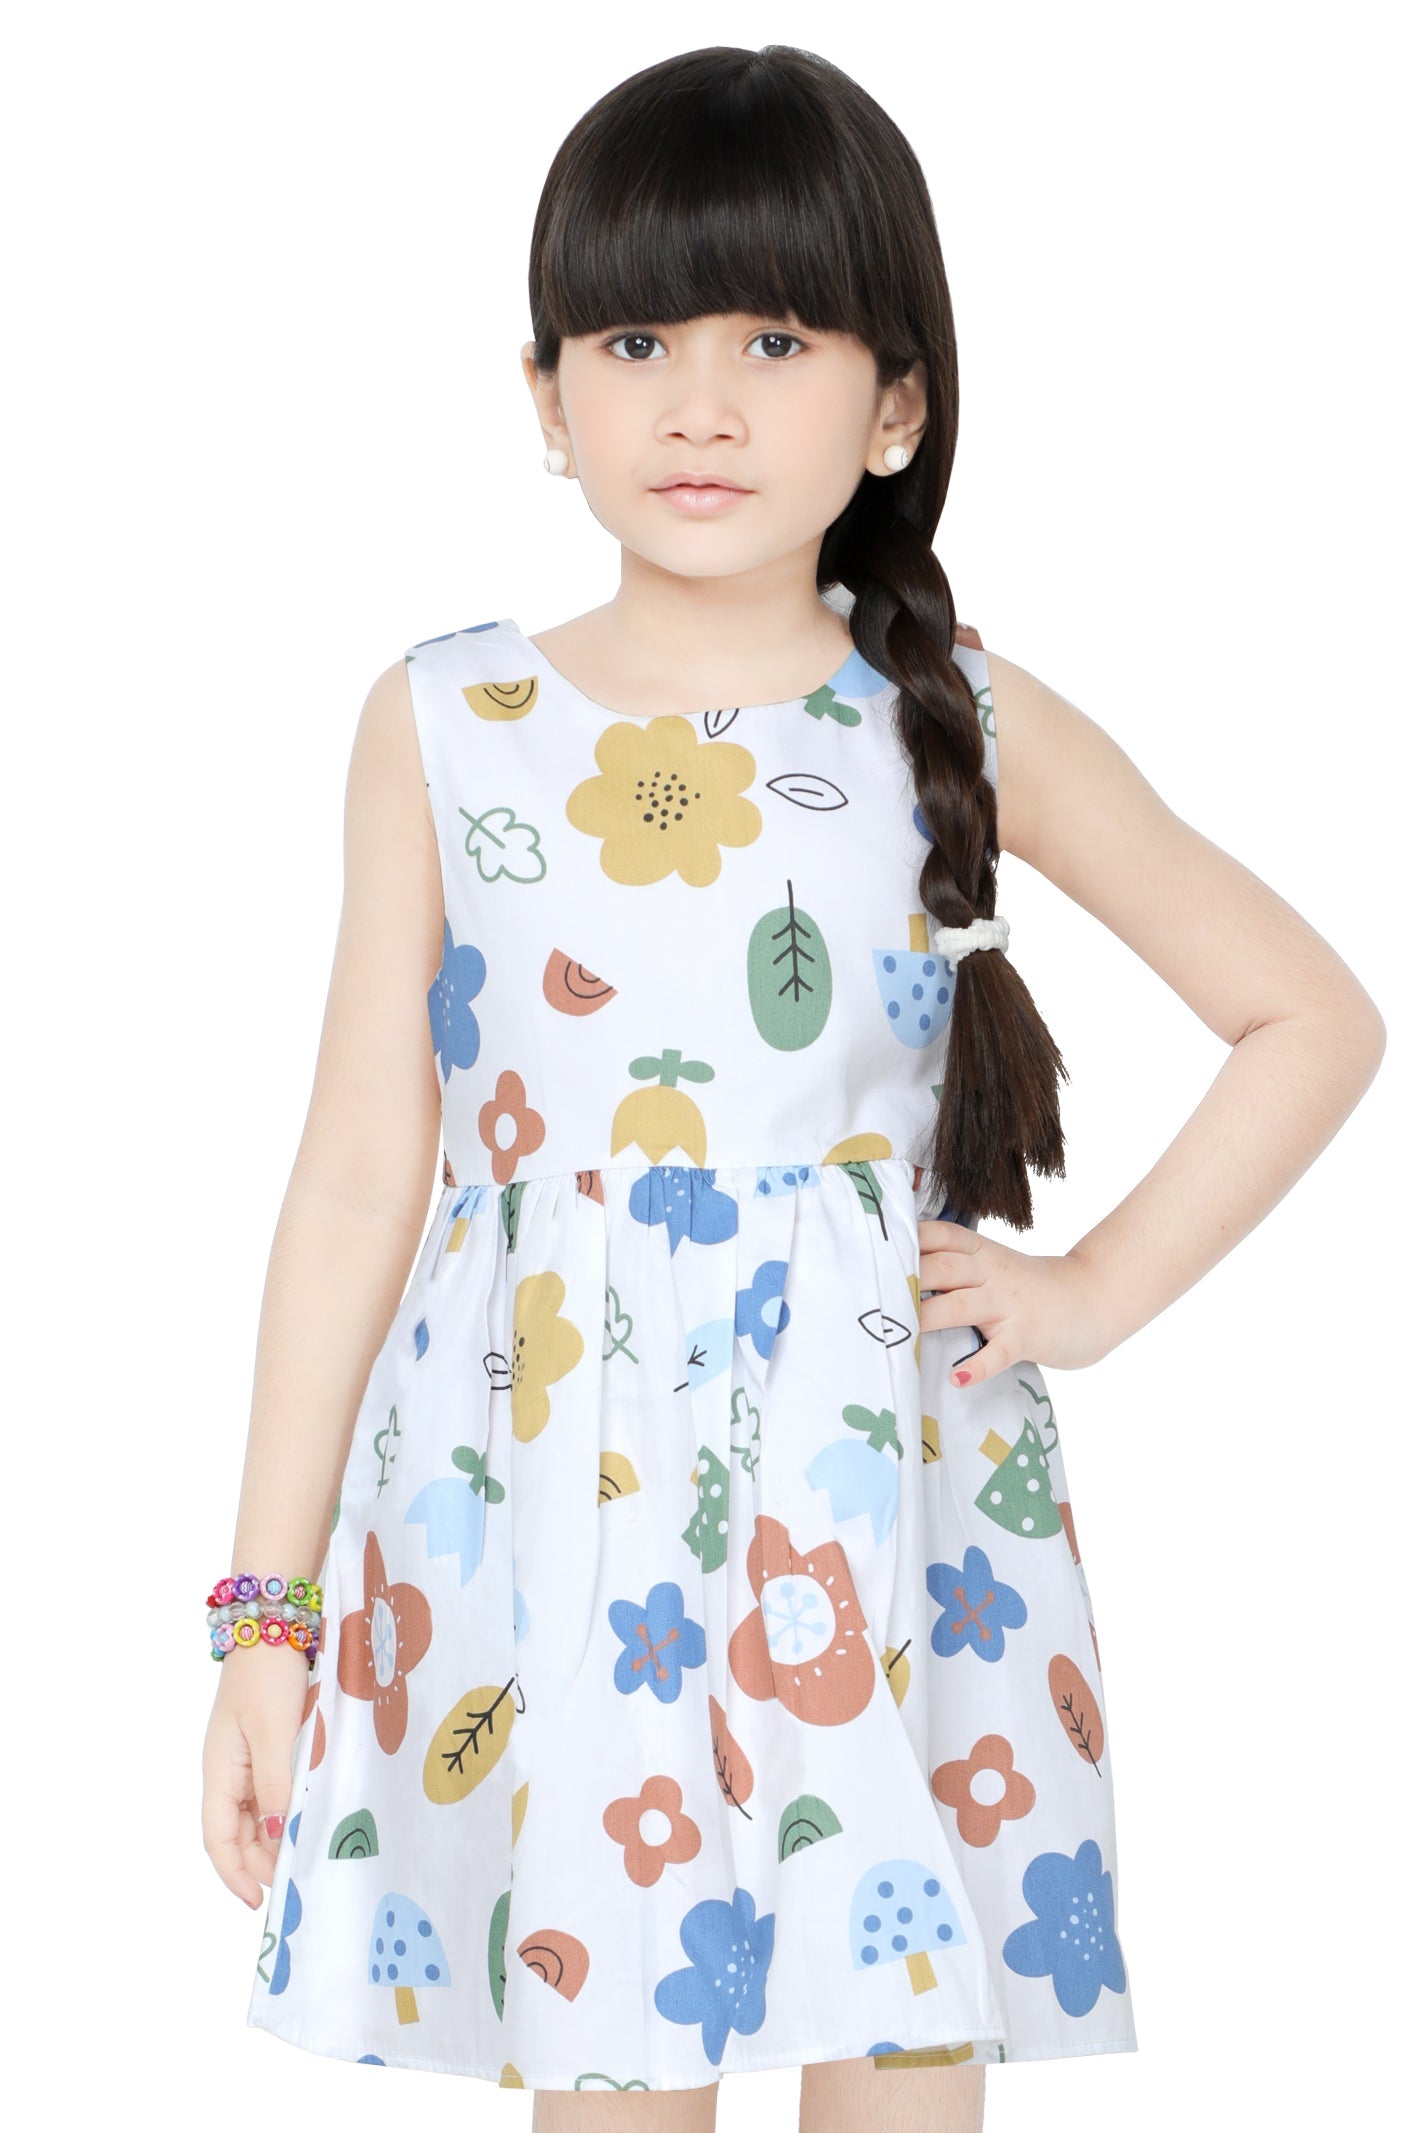 Girls Frock in White SKU: KGL-0341-WHITE - Diners